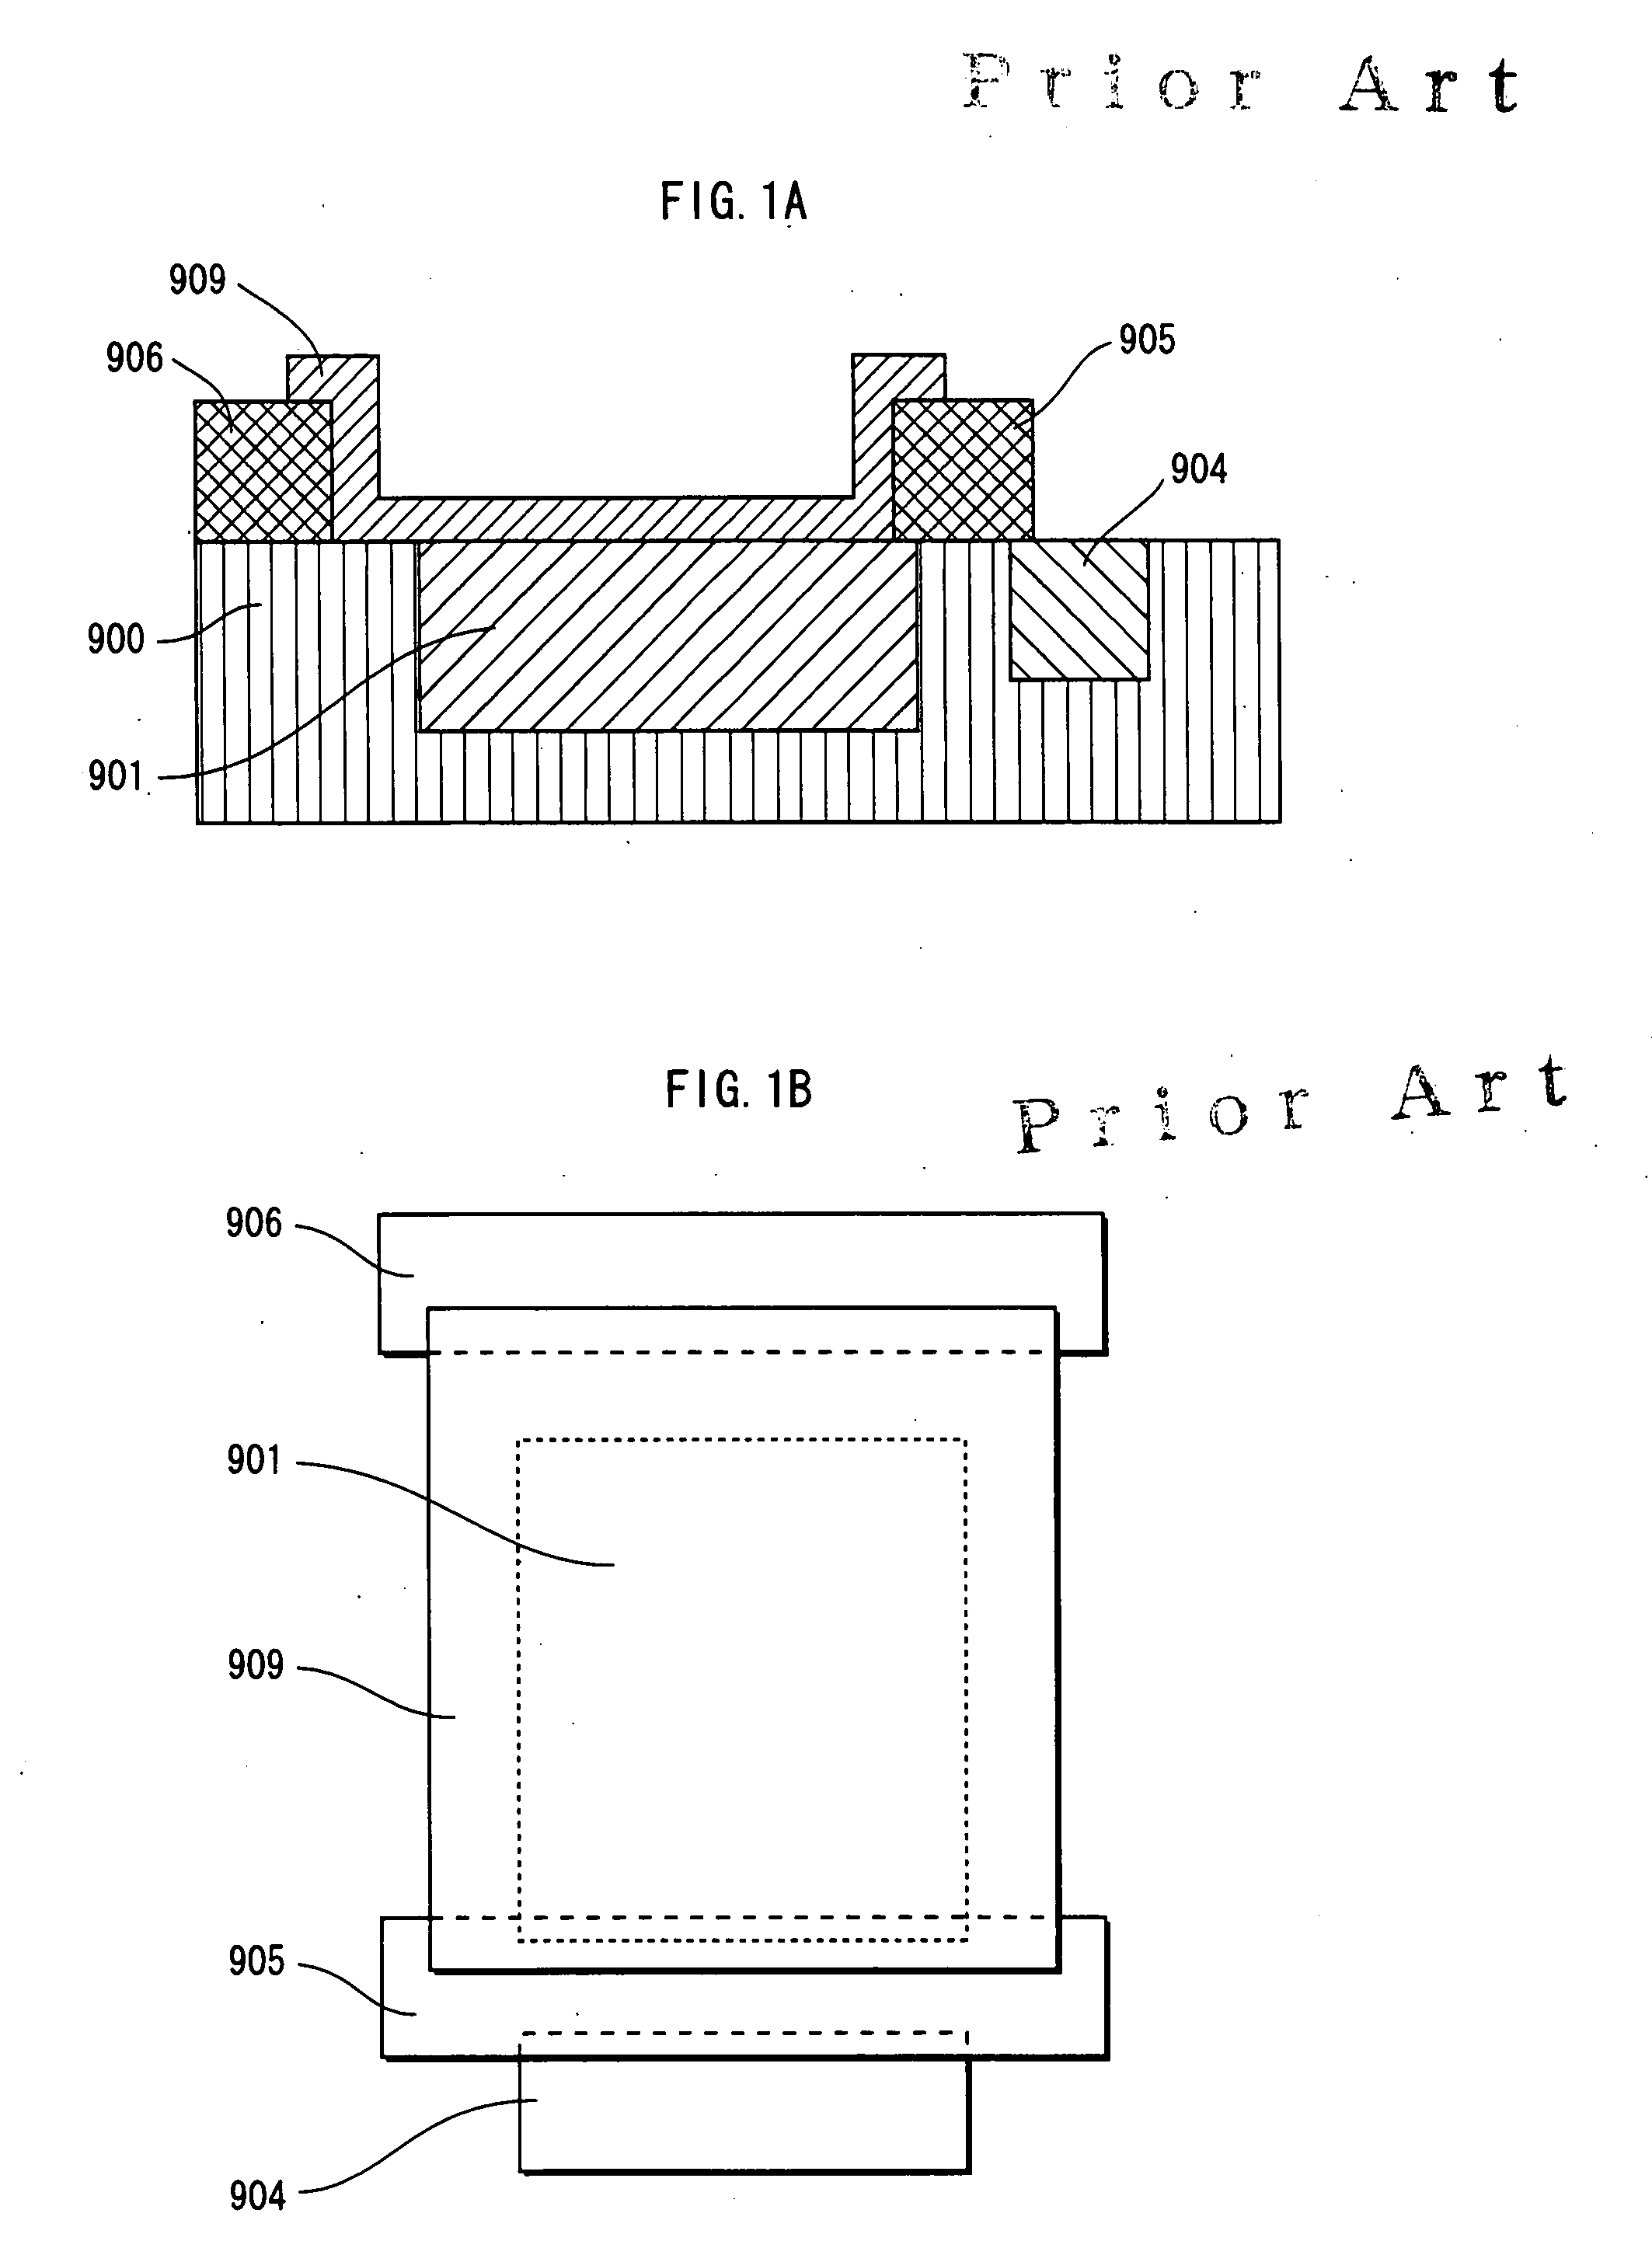 Solid-state imaging device having transmission gates which pass over part of photo diodes when seen from the thickness direction of the semiconductor substrate